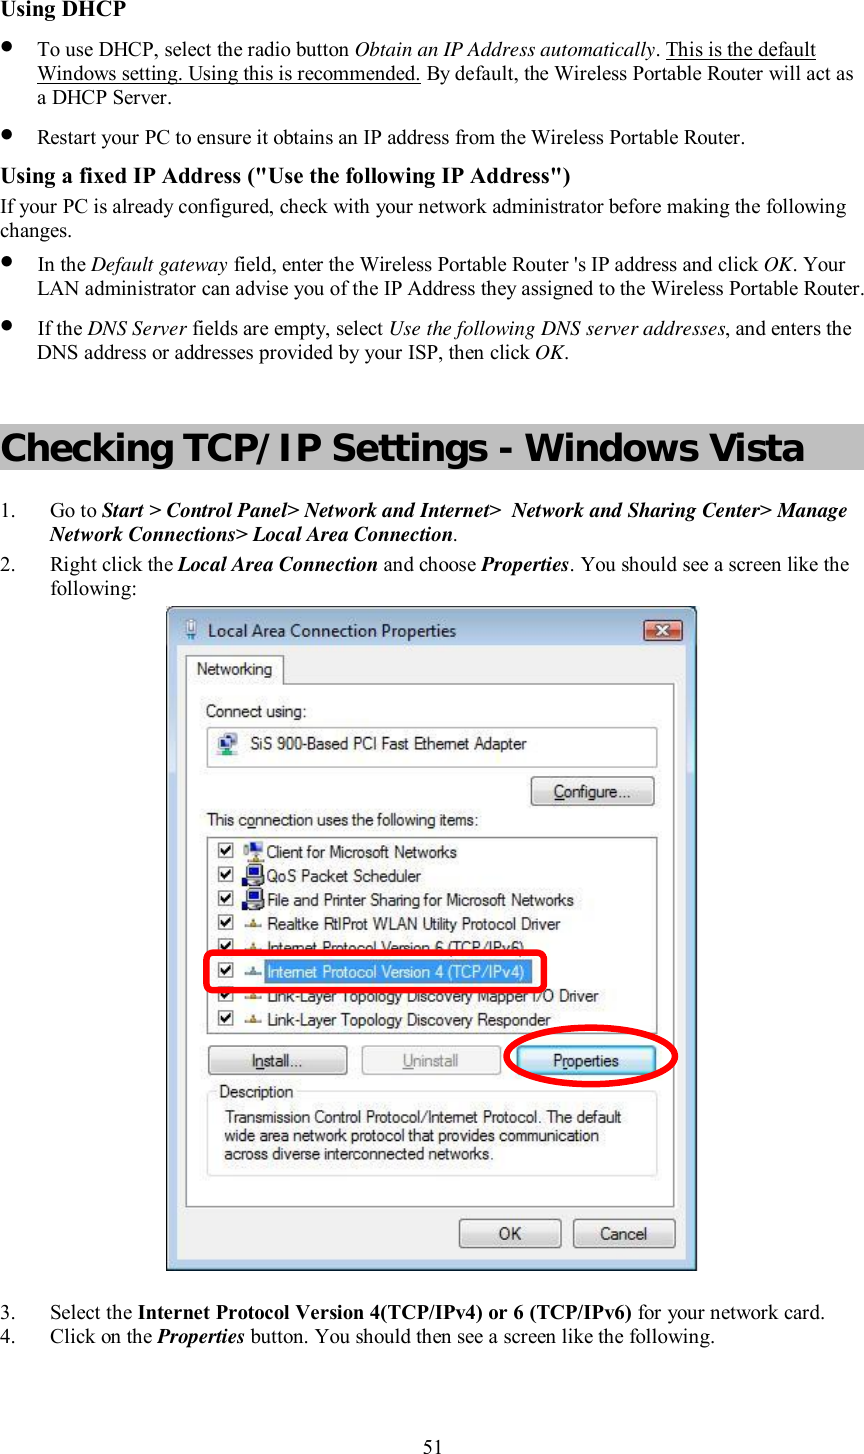    51  Using DHCP • To use DHCP, select the radio button Obtain an IP Address automatically. This is the default Windows setting. Using this is recommended. By default, the Wireless Portable Router will act as a DHCP Server. • Restart your PC to ensure it obtains an IP address from the Wireless Portable Router. Using a fixed IP Address (&quot;Use the following IP Address&quot;) If your PC is already configured, check with your network administrator before making the following changes. • In the Default gateway field, enter the Wireless Portable Router &apos;s IP address and click OK. Your LAN administrator can advise you of the IP Address they assigned to the Wireless Portable Router. • If the DNS Server fields are empty, select Use the following DNS server addresses, and enters the DNS address or addresses provided by your ISP, then click OK.  Checking TCP/IP Settings - Windows Vista 1. Go to Start &gt; Control Panel&gt; Network and Internet&gt;  Network and Sharing Center&gt; Manage Network Connections&gt; Local Area Connection. 2. Right click the Local Area Connection and choose Properties. You should see a screen like the following:  3. Select the Internet Protocol Version 4(TCP/IPv4) or 6 (TCP/IPv6) for your network card. 4. Click on the Properties button. You should then see a screen like the following. 